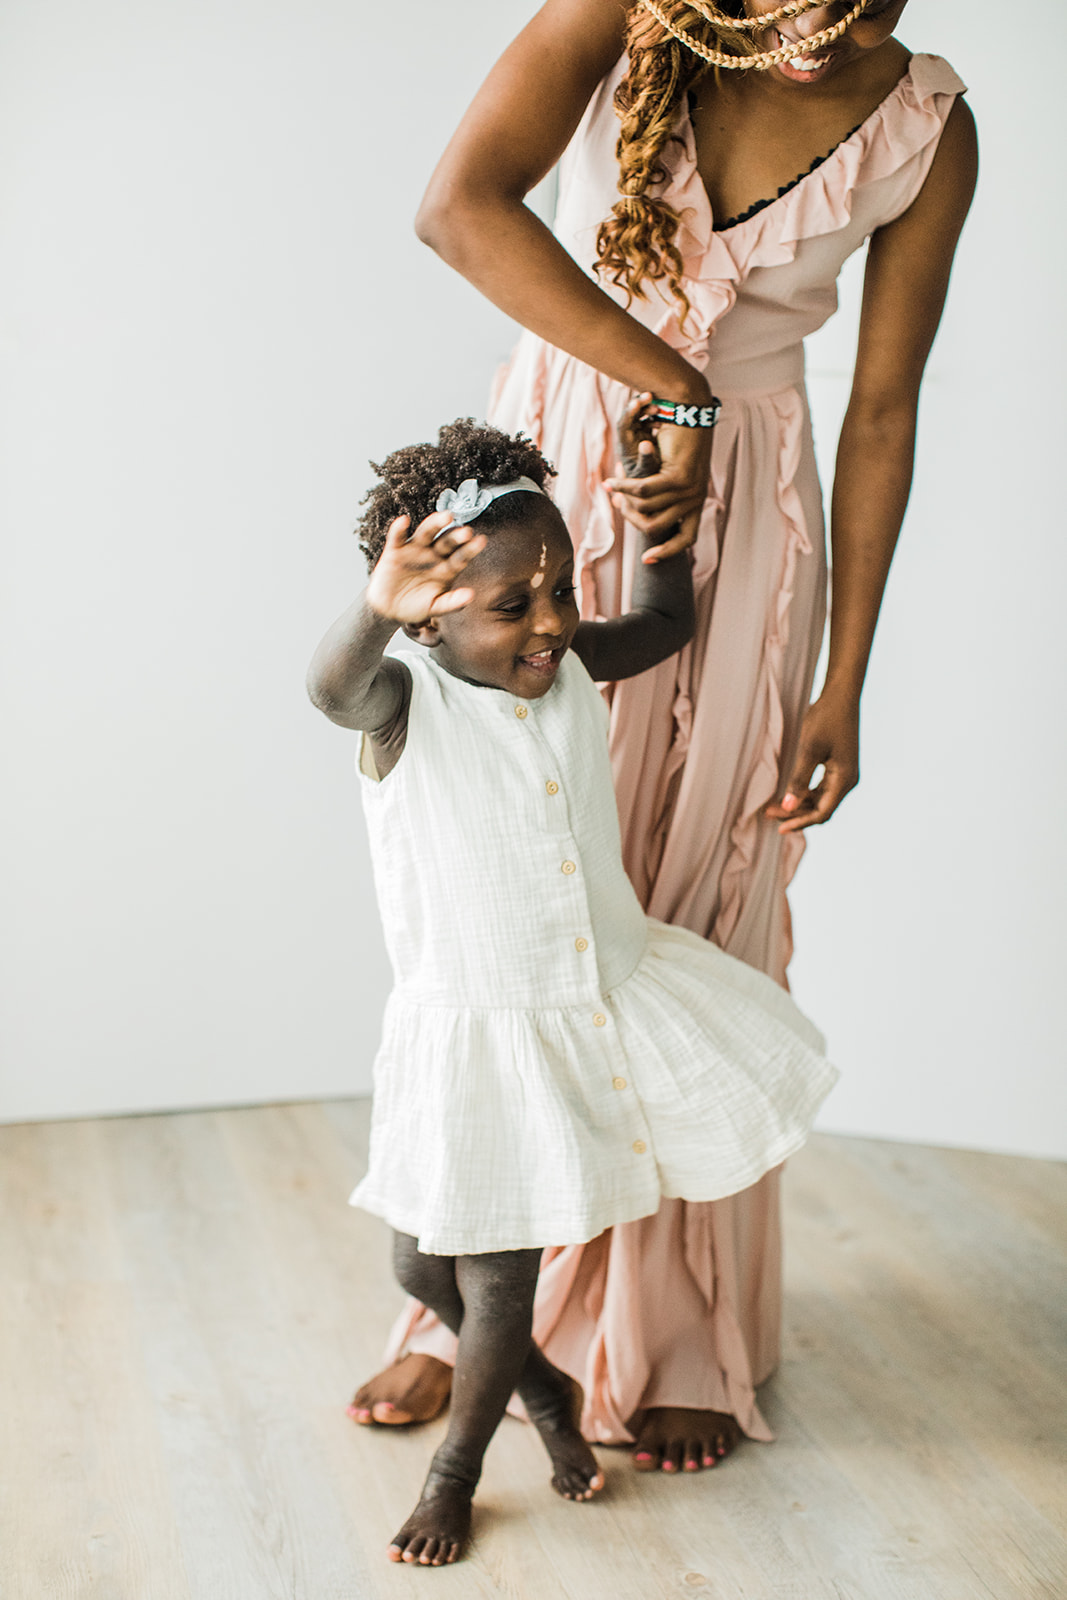 Floral Field Mommy & Me Session from Sarah Sidwell Photography featured on Nashville Baby Guide